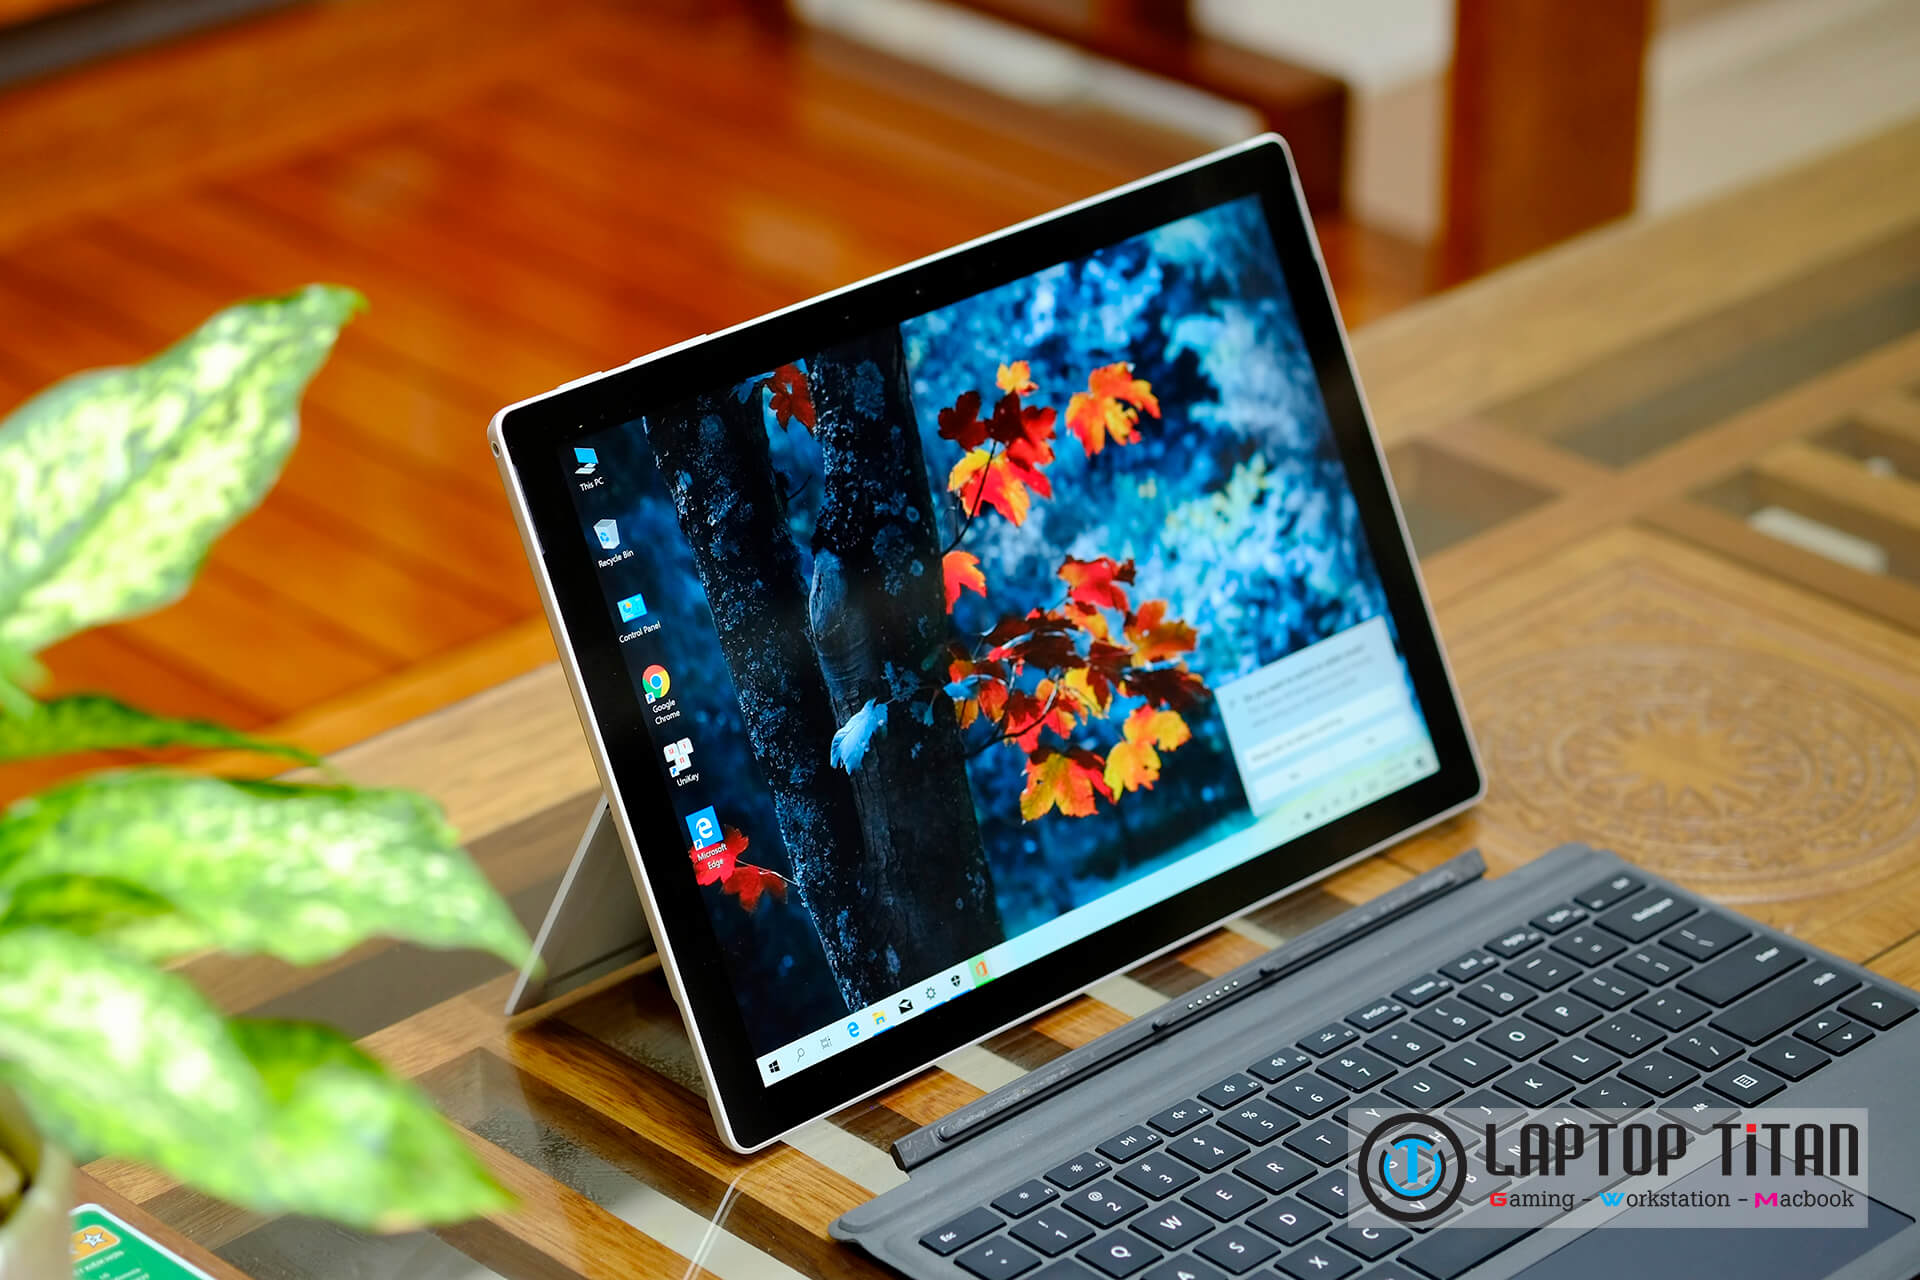 Surface Pro 7 Core I5 / 8Gb / 256Gb / 12.3-Inch 2K Touch / 0.76Kg / 99%